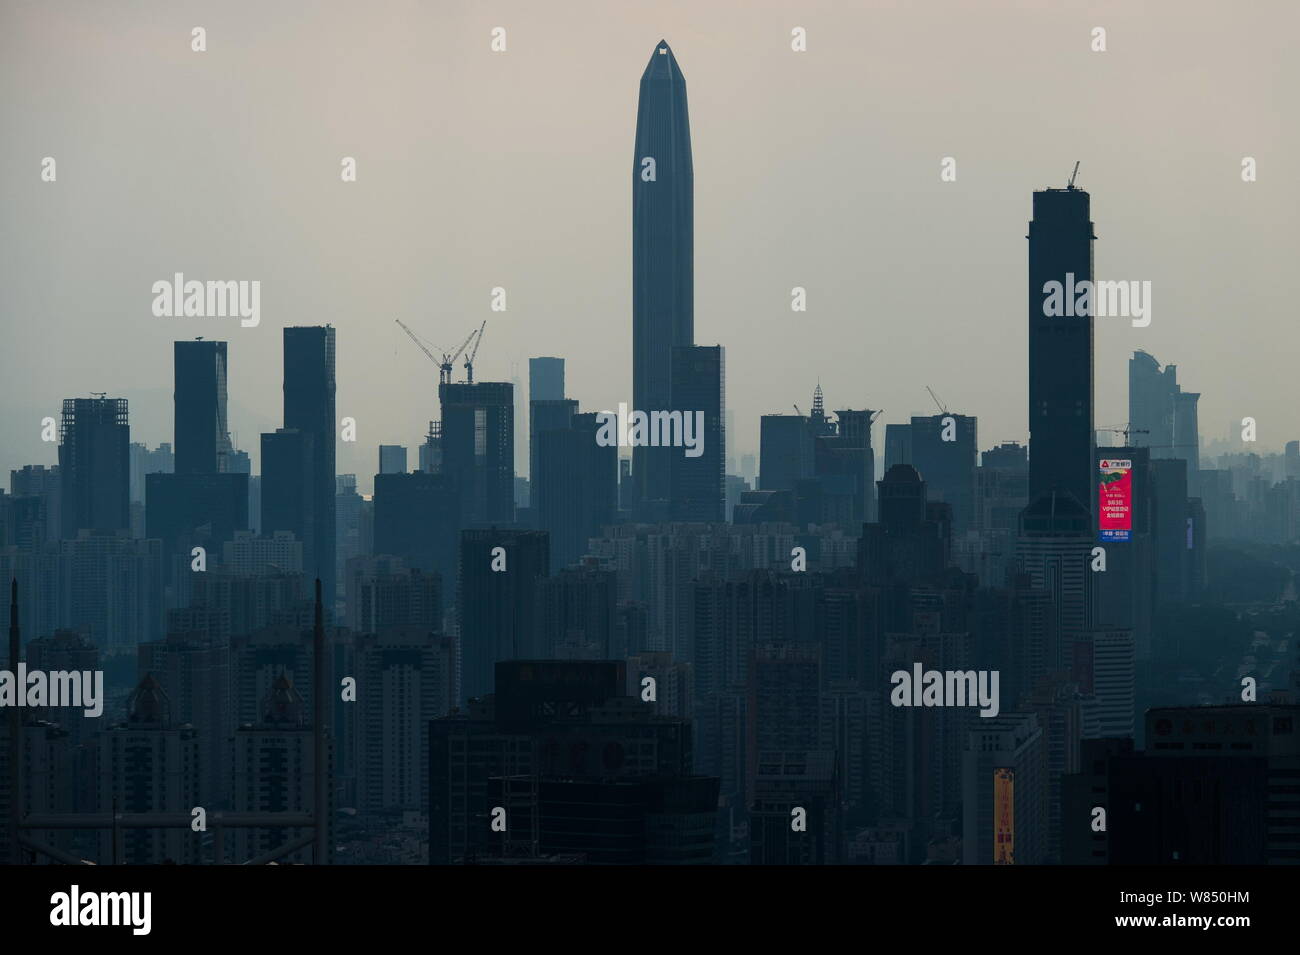 Skyline of Futian District with the Ping An International Finance Centre, tallest, and other high-rise residential and office buildings in Shenzhen ci Stock Photo